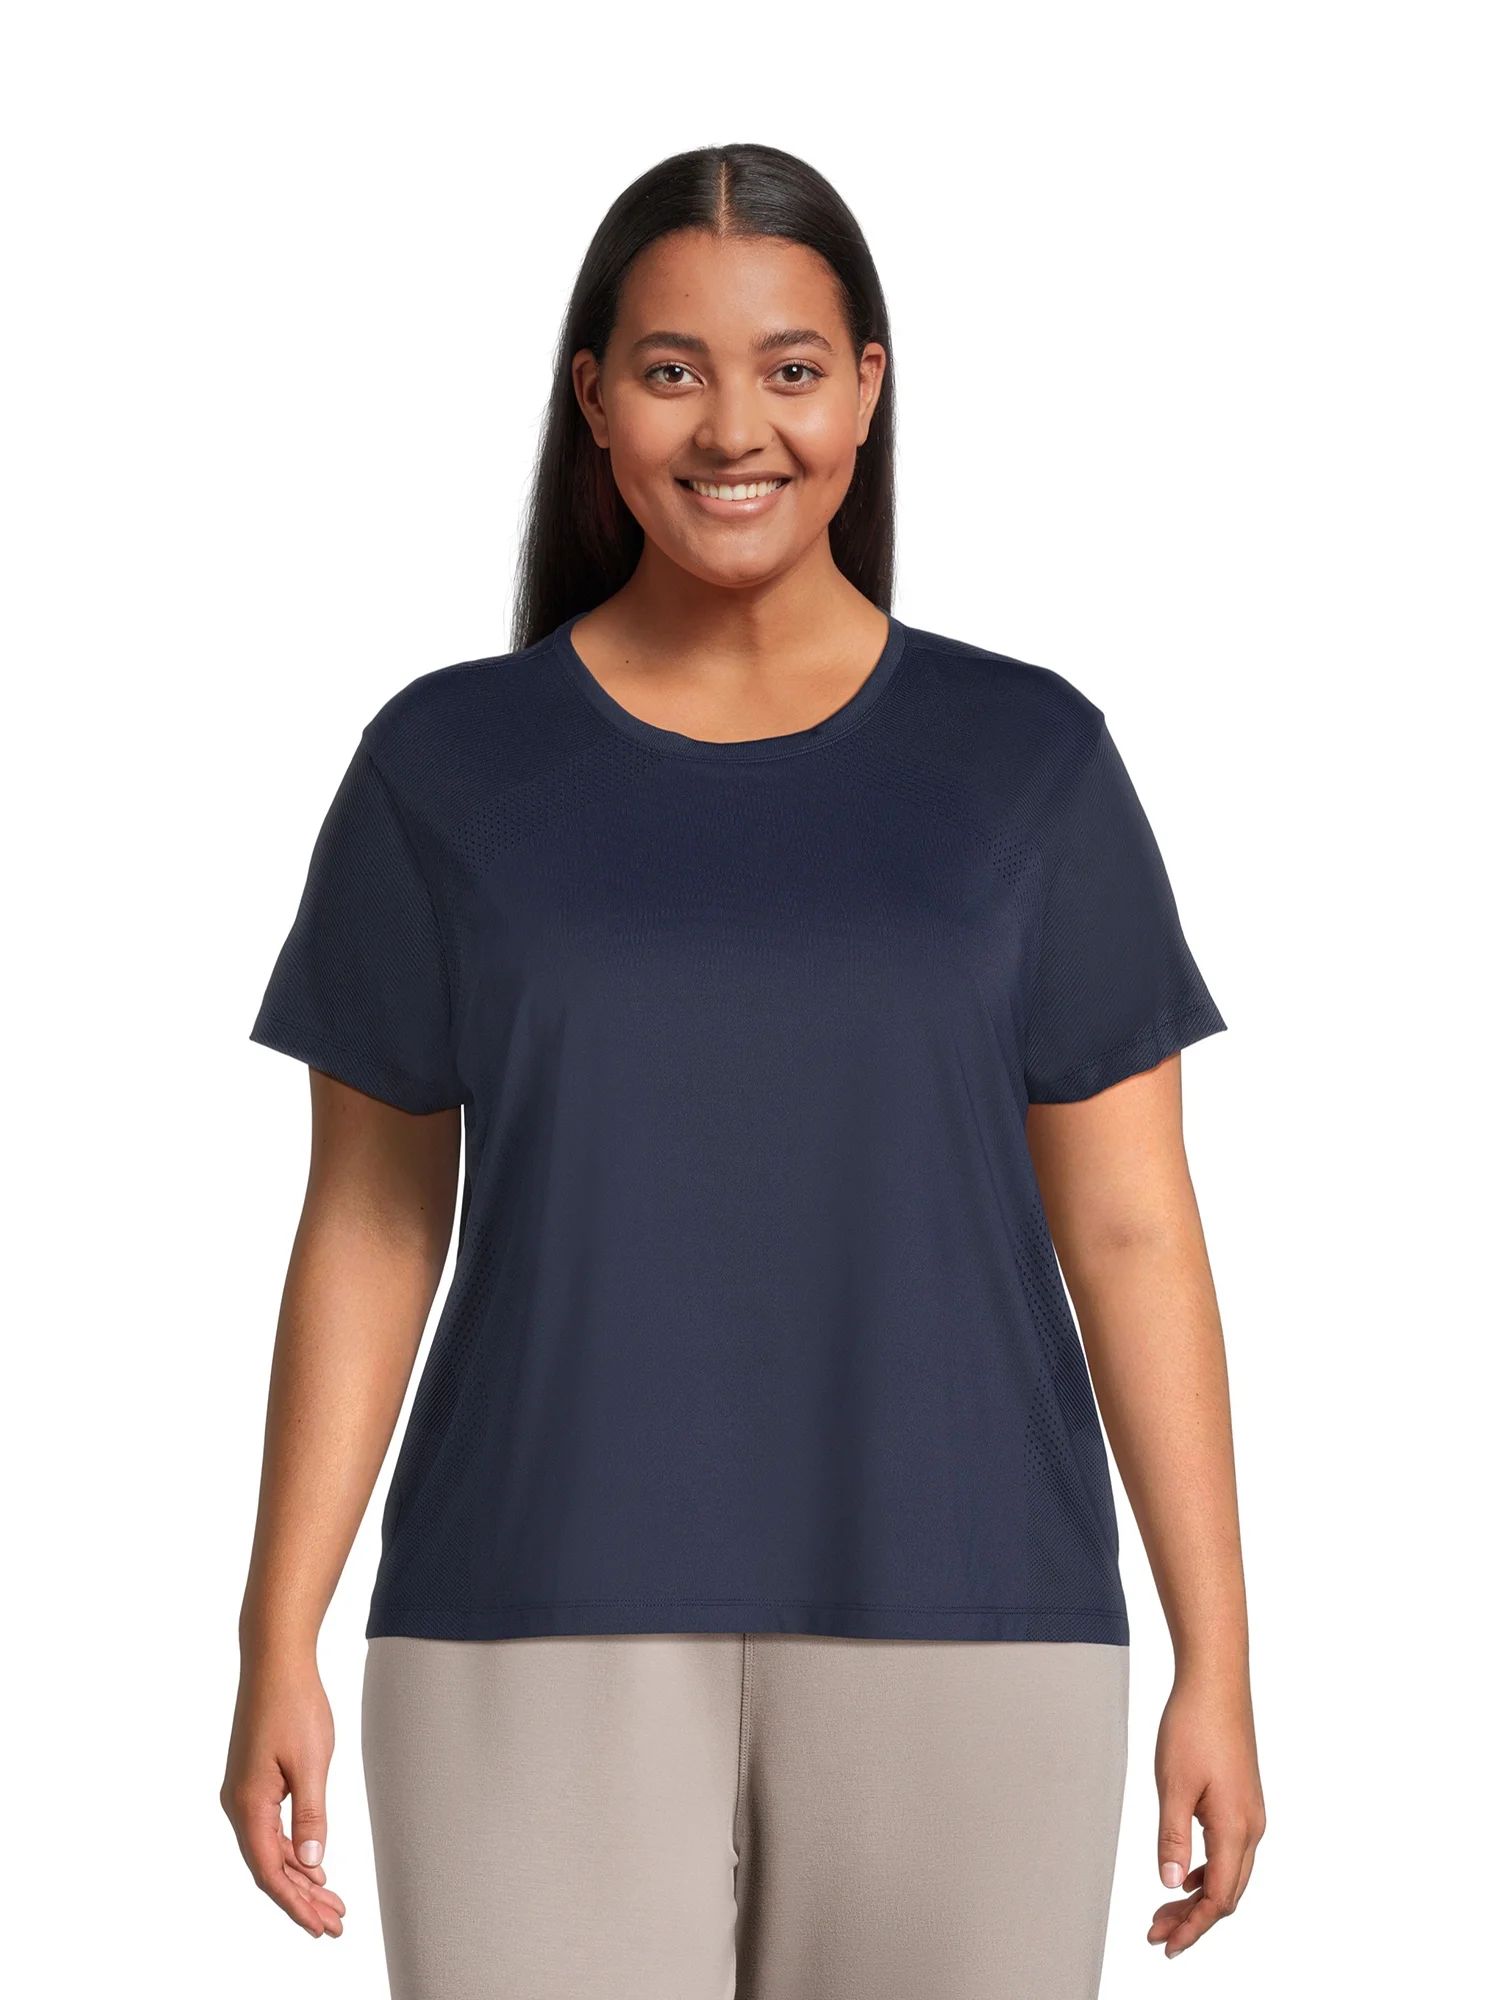 Avia Women’s Perforated Performance T-Shirt with Short Sleeves, Sizes S-XXXL | Walmart (US)